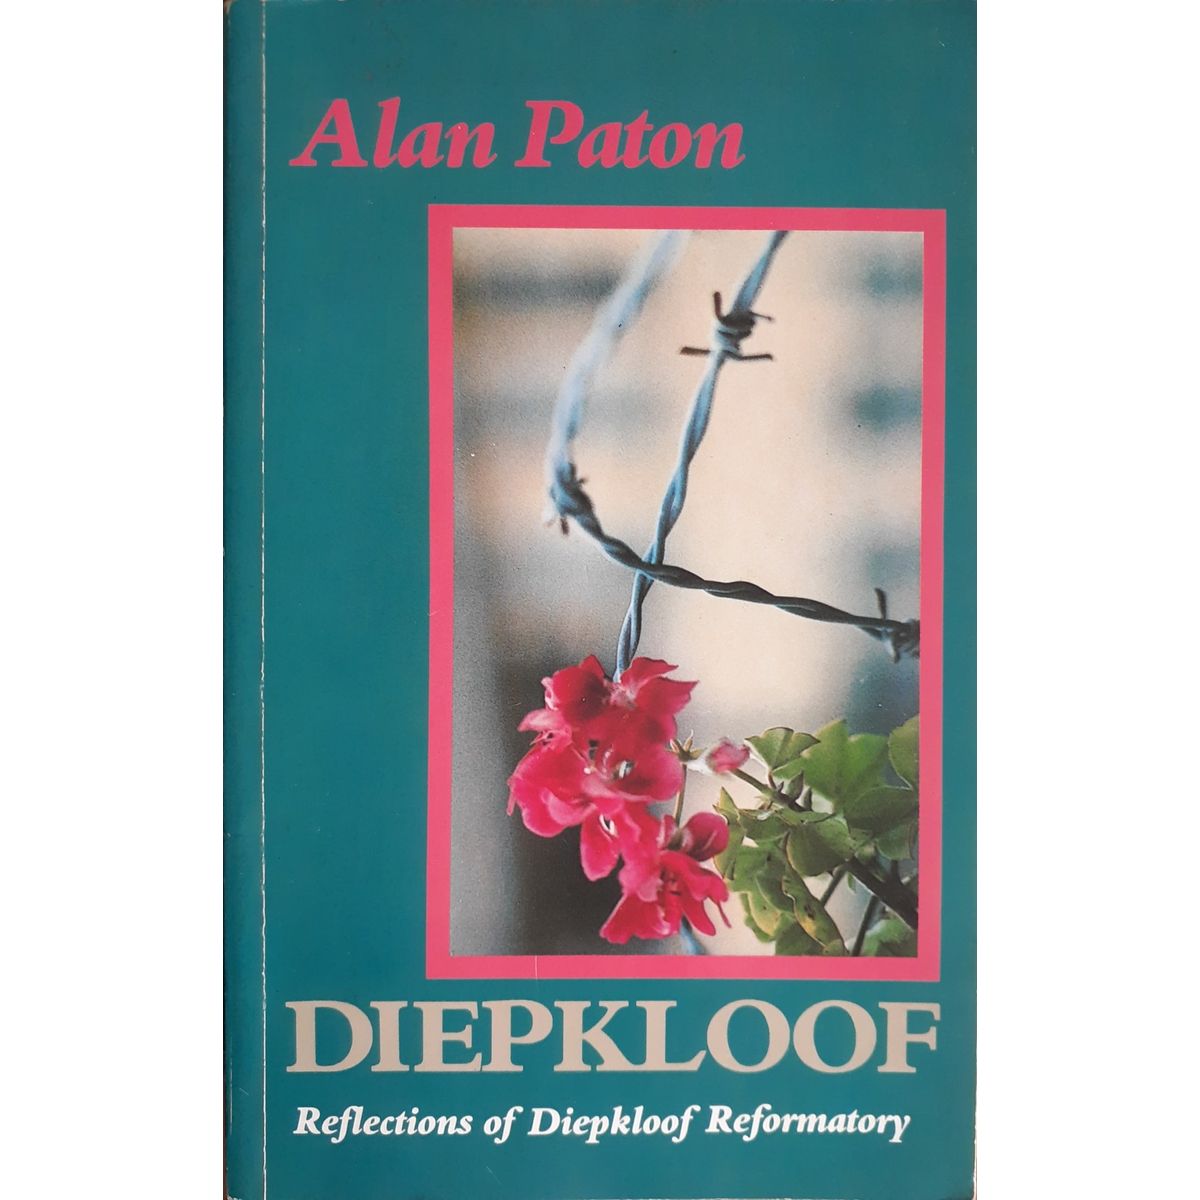 ISBN: 9780864860439 / 0864860439 - Diepkloof: Reflections of Diepkloof Reformatory by Alan Paton, edited by Clyde Broster [1988]